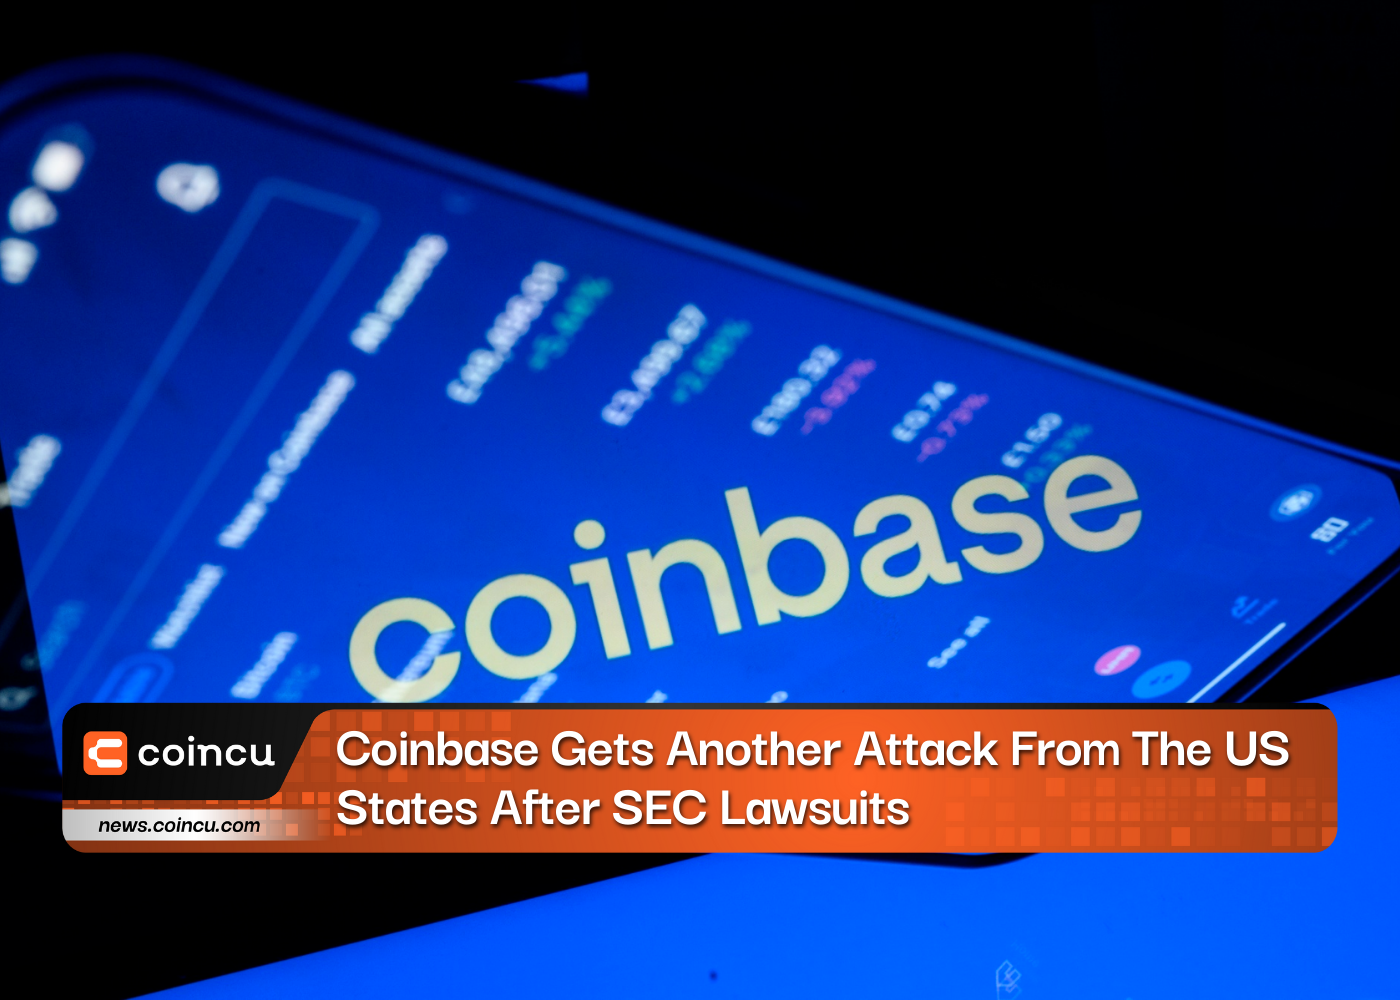 Coinbase Gets Another Attack From The US States After SEC Lawsuits